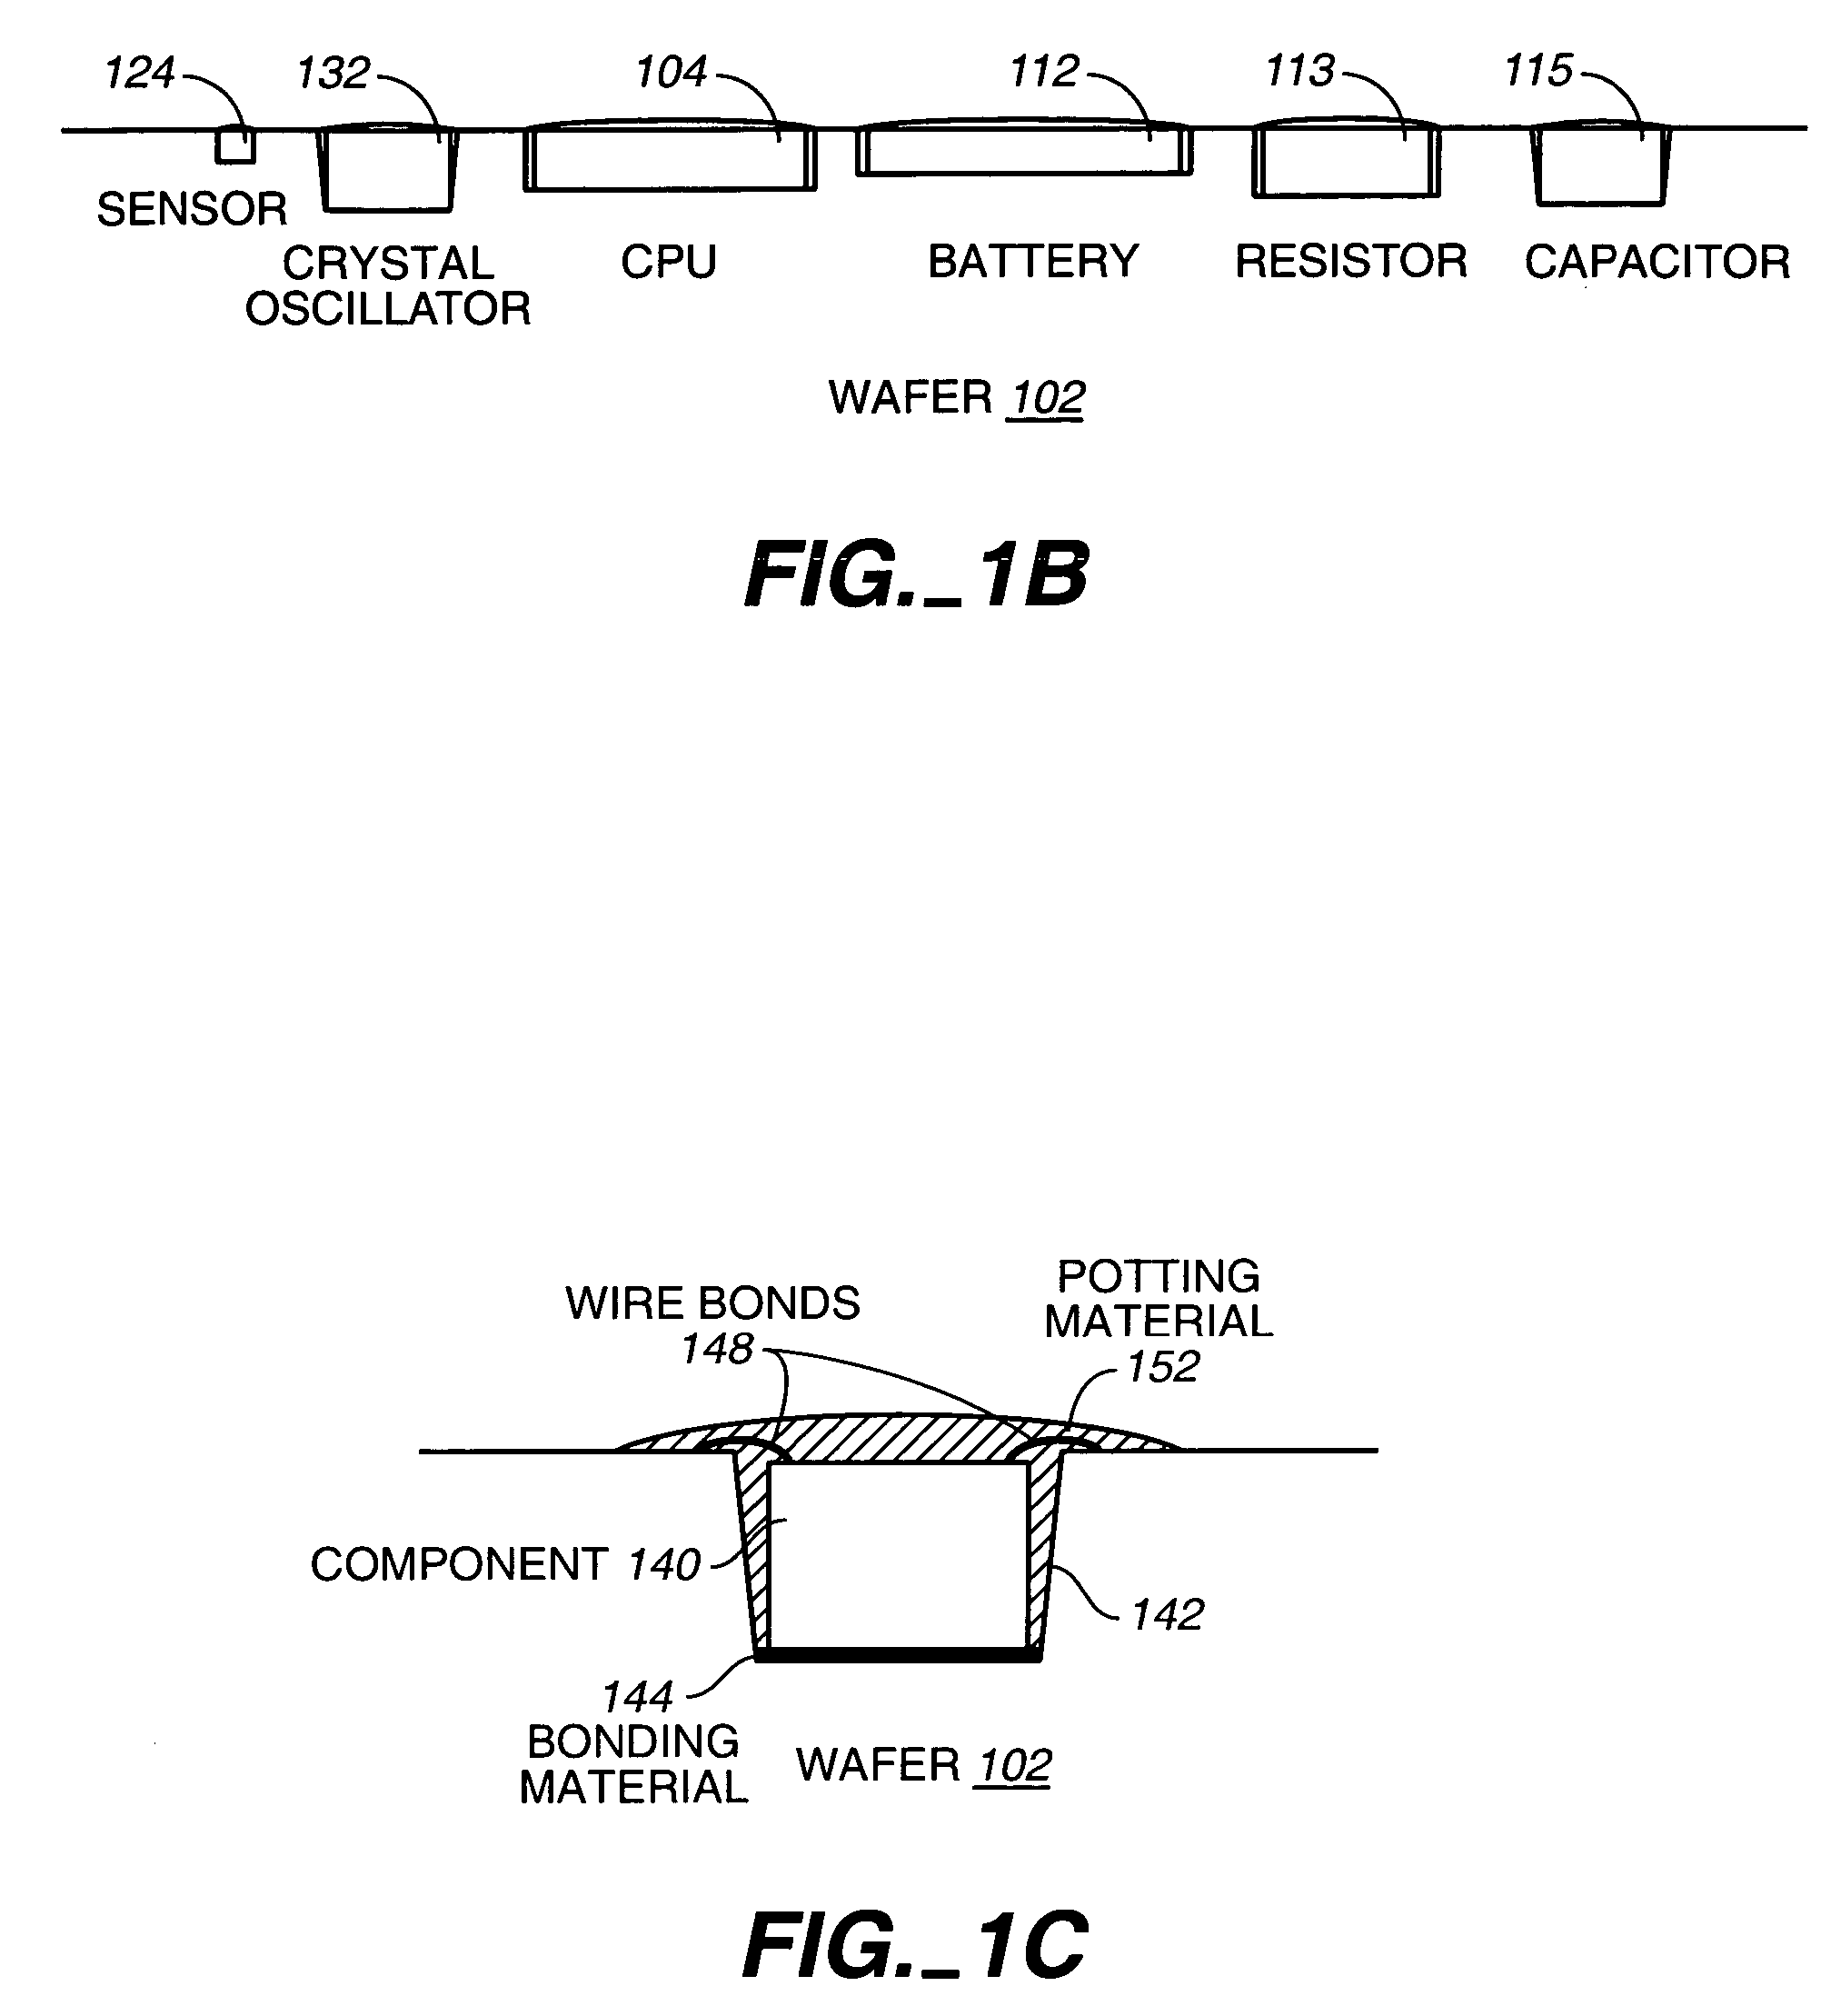 Integrated process condition sensing wafer and data analysis system